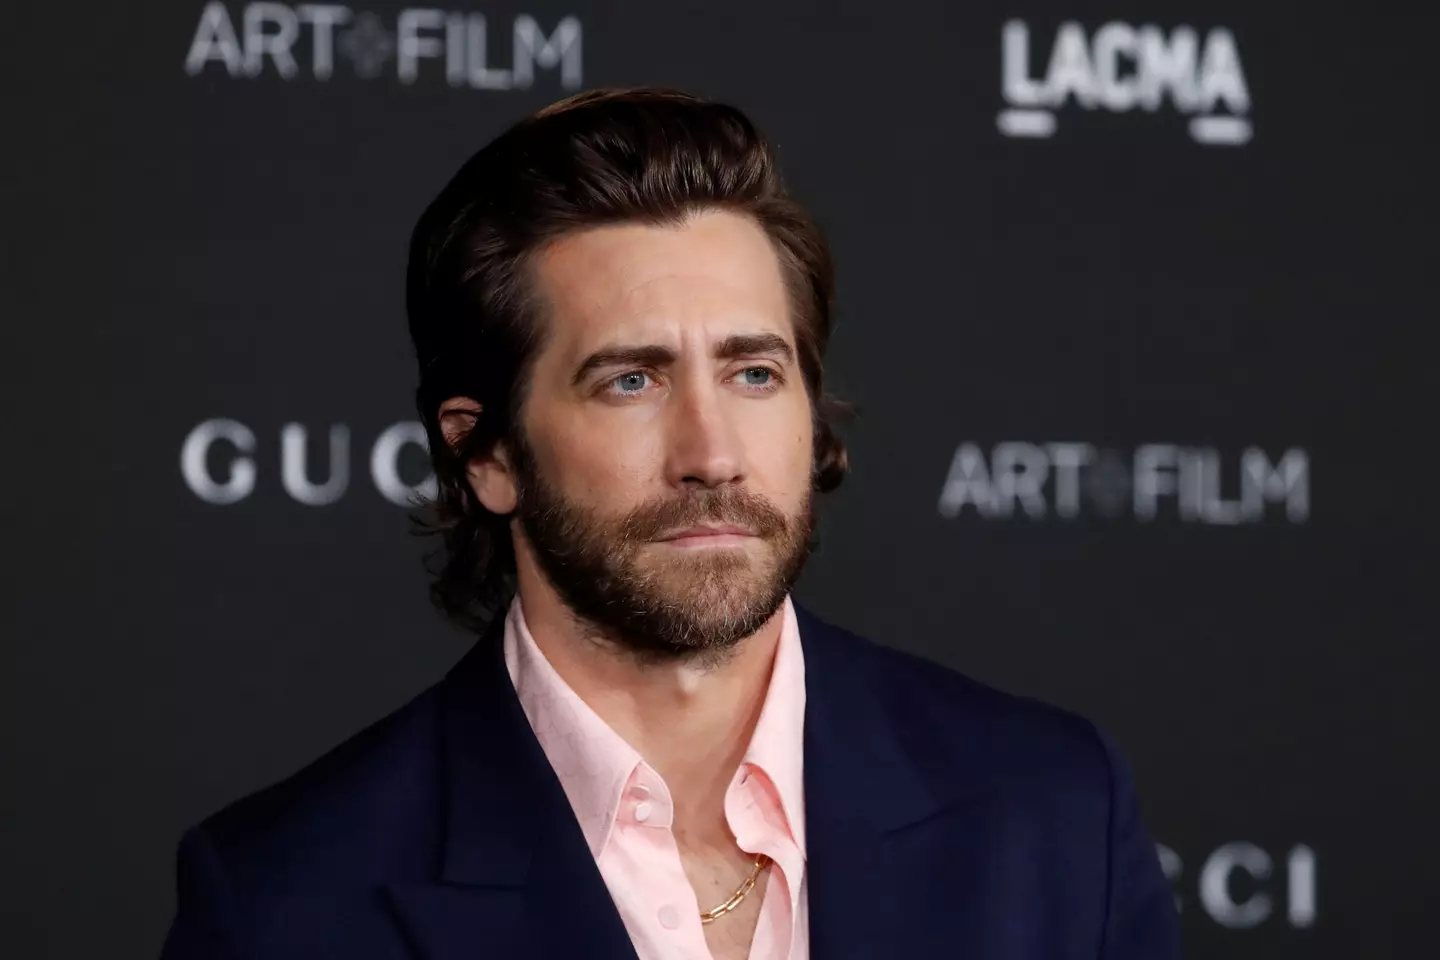 Jake Gyllenhaal will officially star in a reimagination of the iconic 80s film.